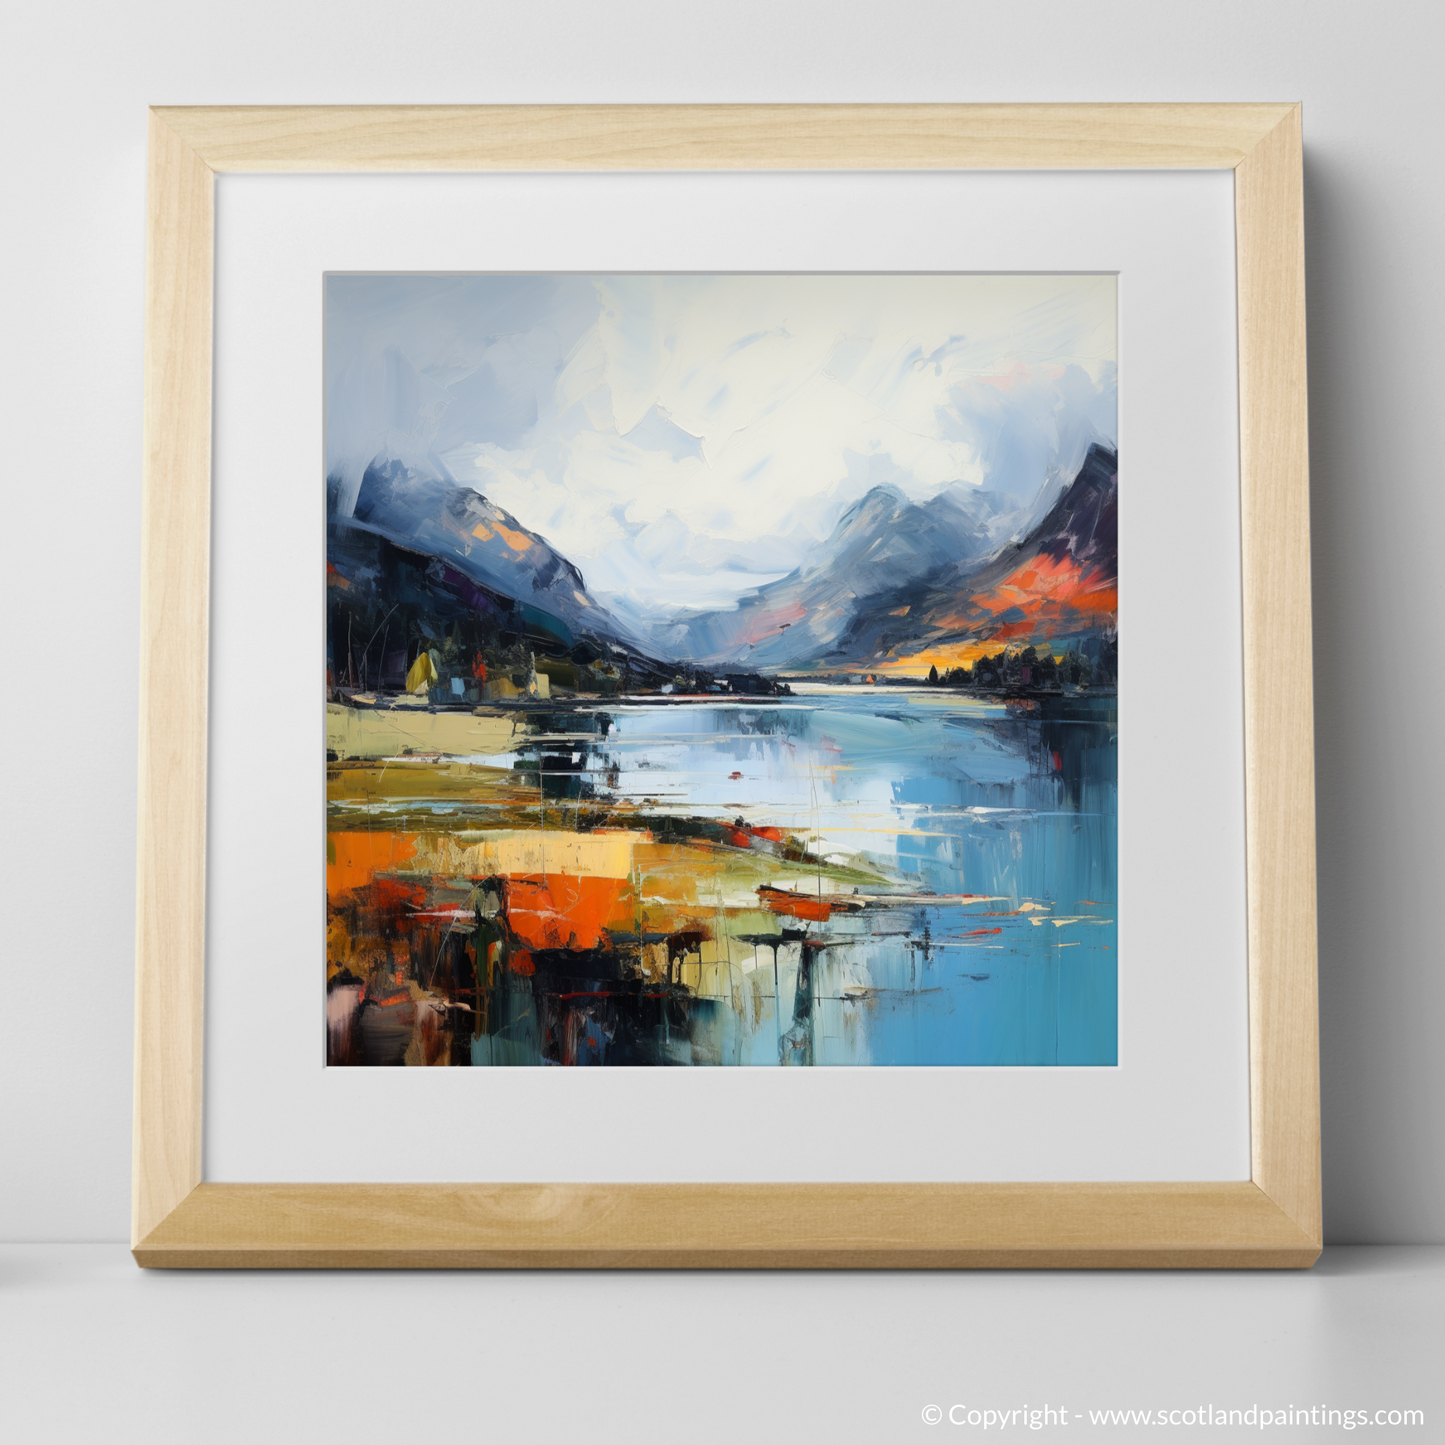 Art Print of Loch Leven, Highlands with a natural frame